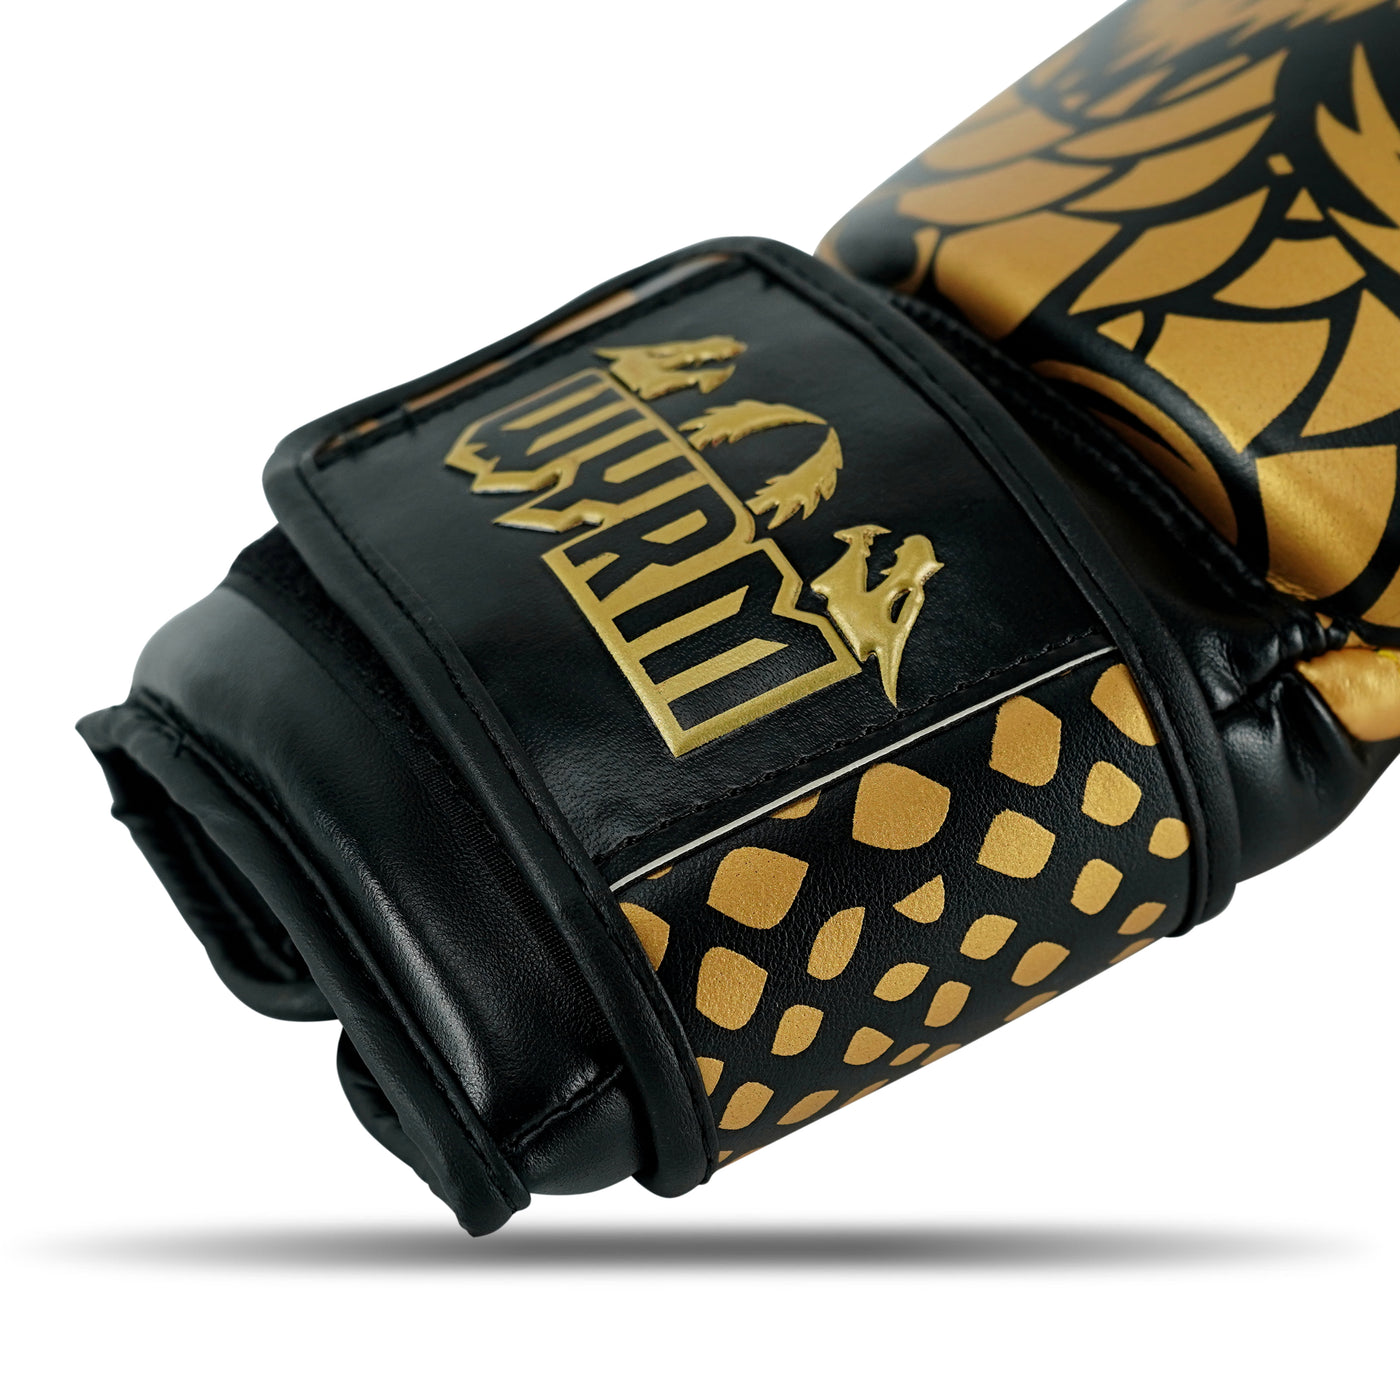 Dragon Gold/Black Leather Boxing Gloves